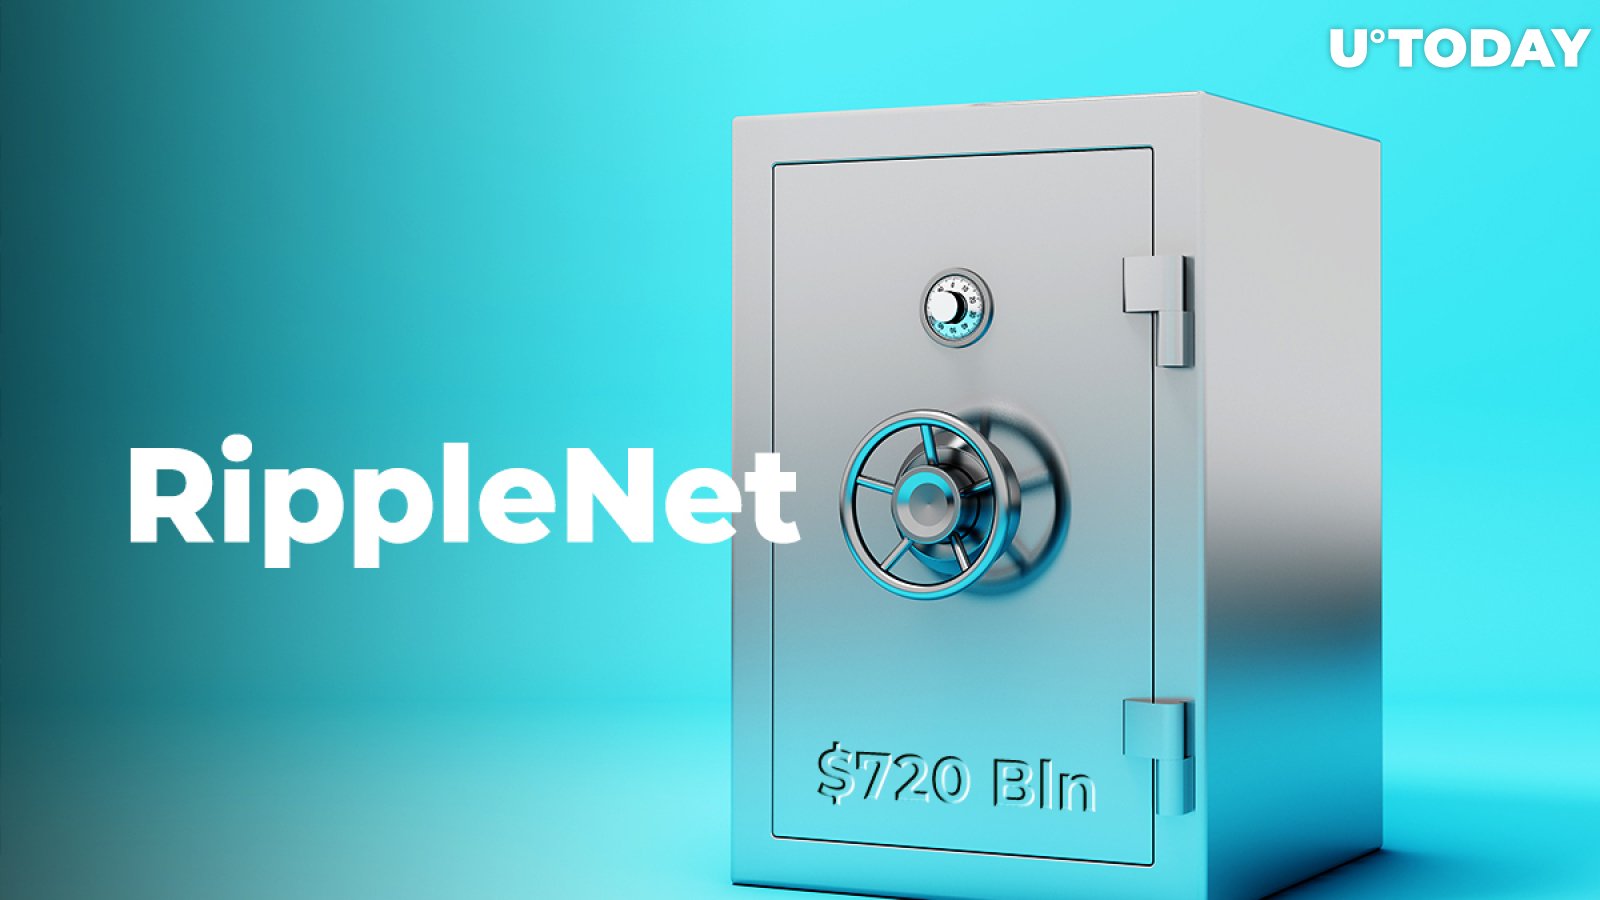 RippleNet Customer with $720 Bln Worth of Assets Under Management Says Crypto Is Here to Stay